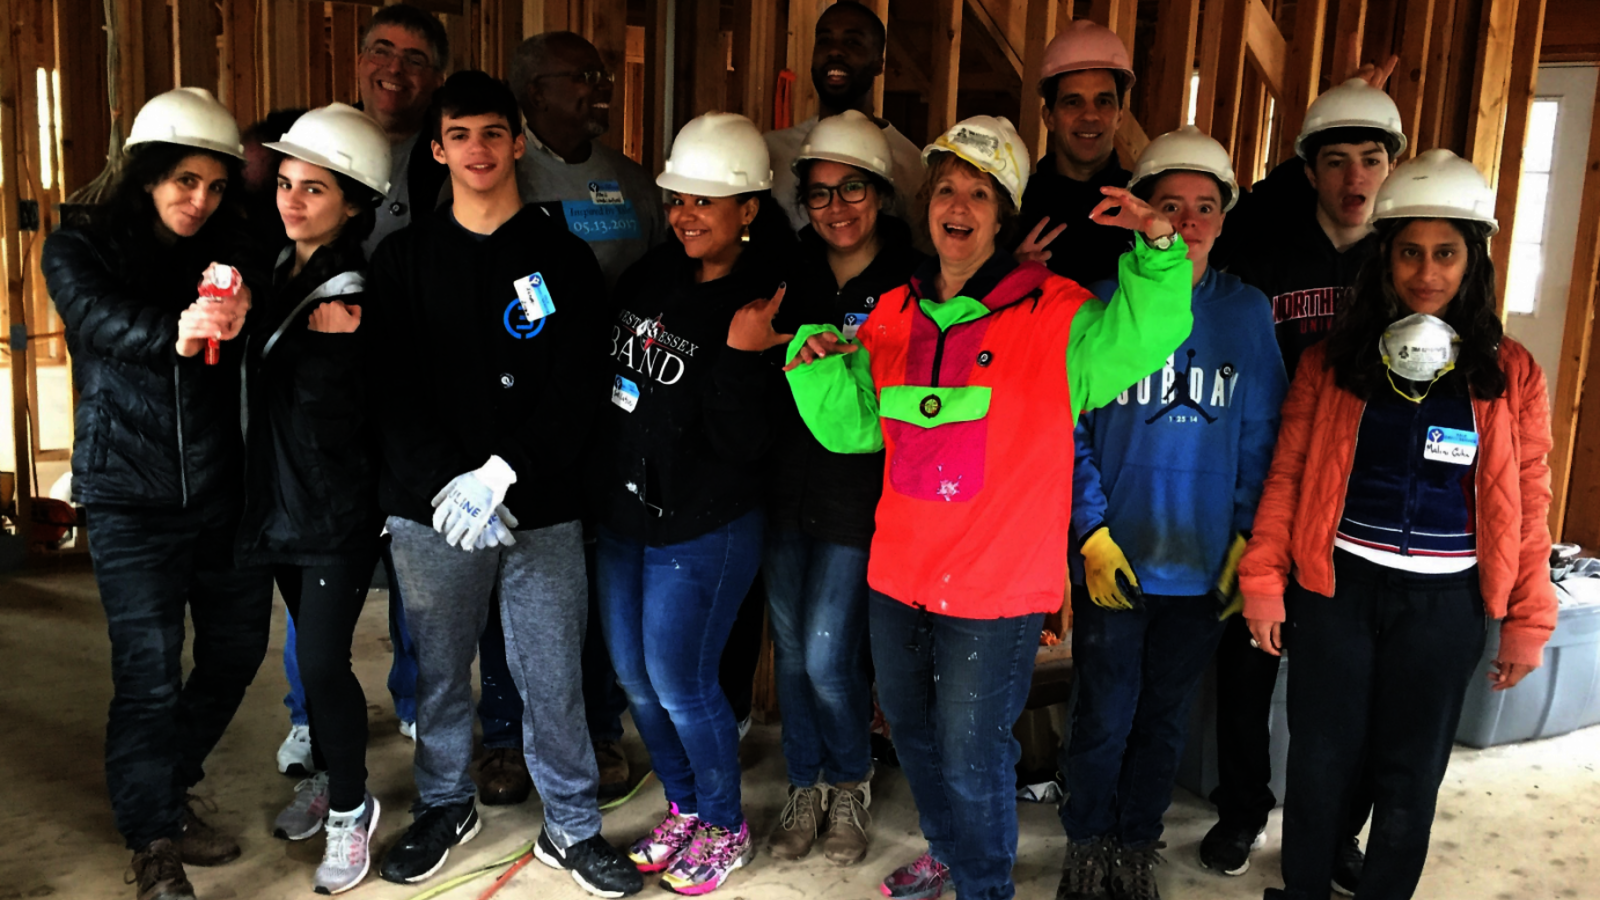 Morristown, NJ: Yale alumni and friends had a great time at their build for Morris Habitat for Humanity.